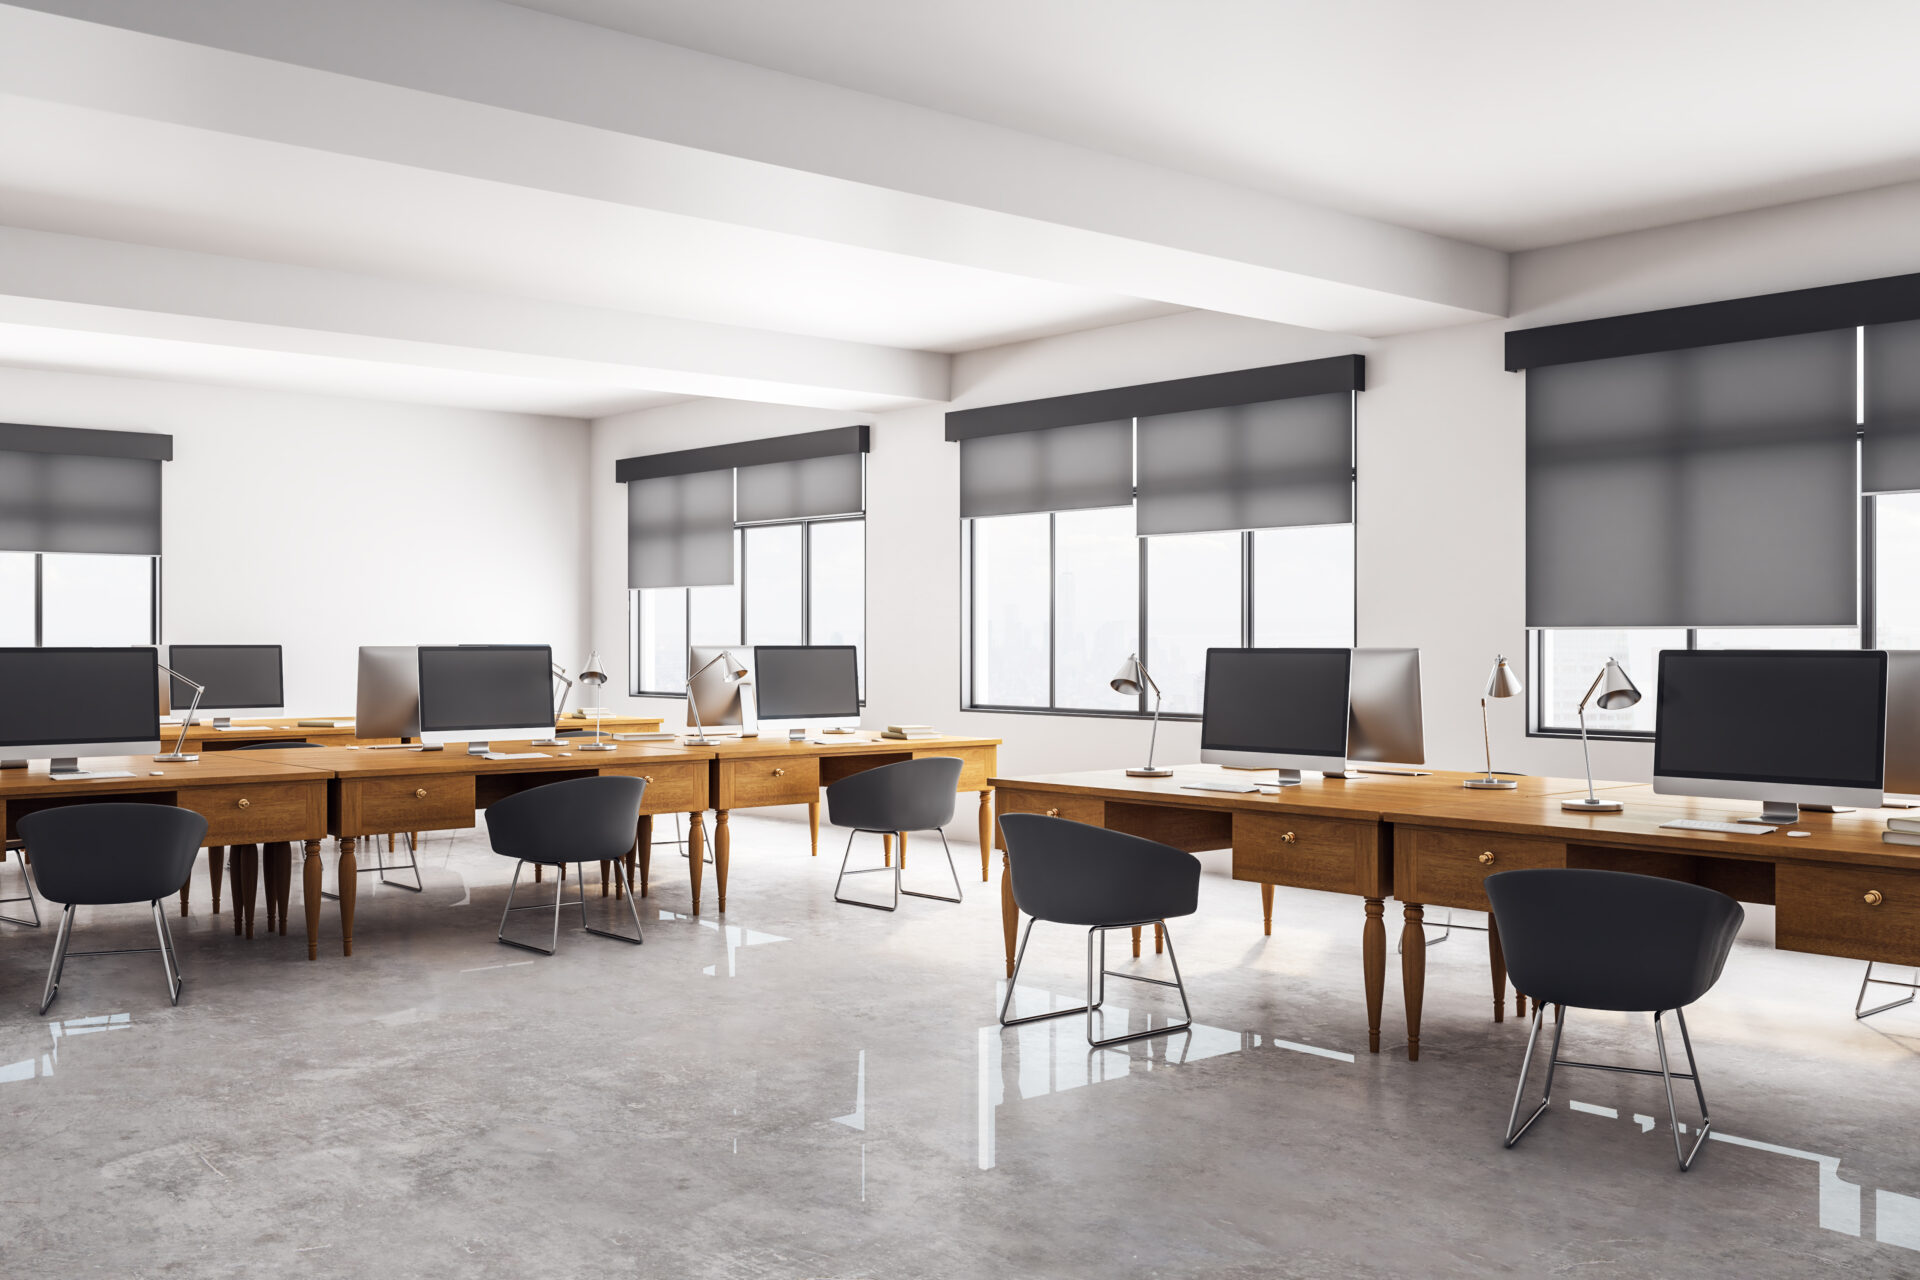 Clean concrete coworking office interior with window blinds for privacy. Wholesale Blind Factory